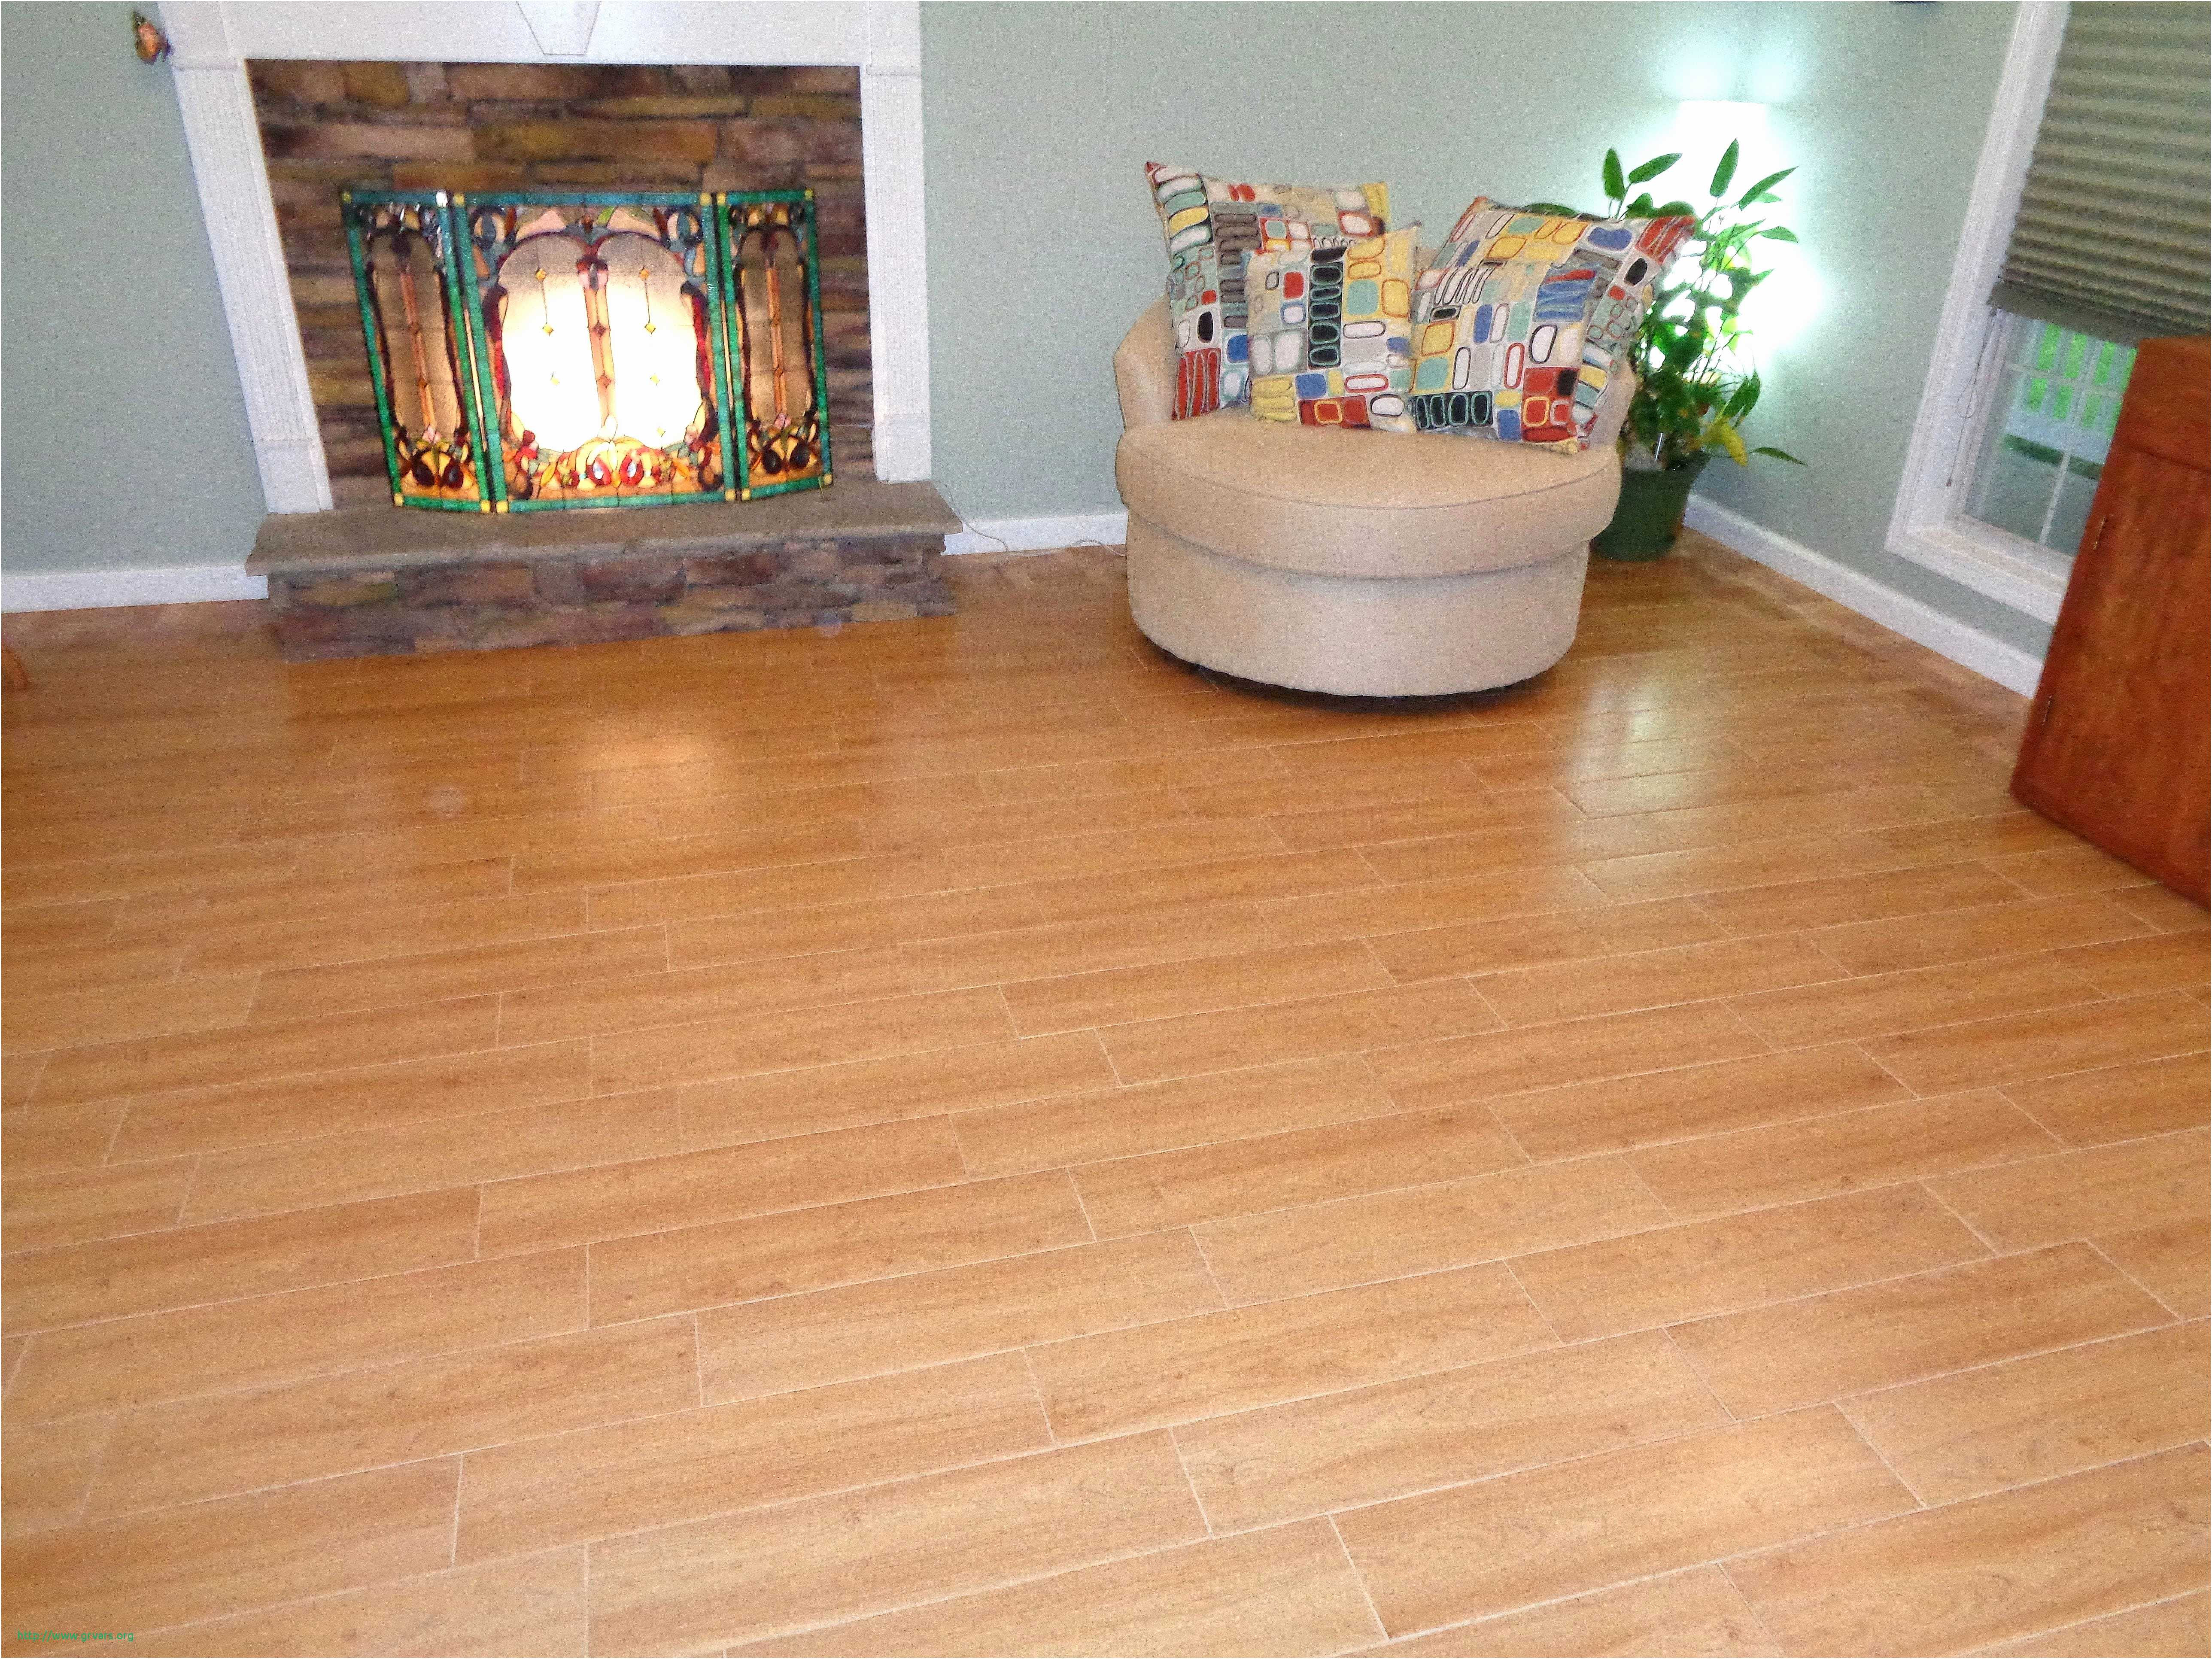 24 Wonderful Hardwood Flooring Sale In Mississauga 2022 free download hardwood flooring sale in mississauga of 24 inspirant how much are wood floors ideas blog within how much are wood floors beau laminated wooden flooring prices guide to solid hardwood floors